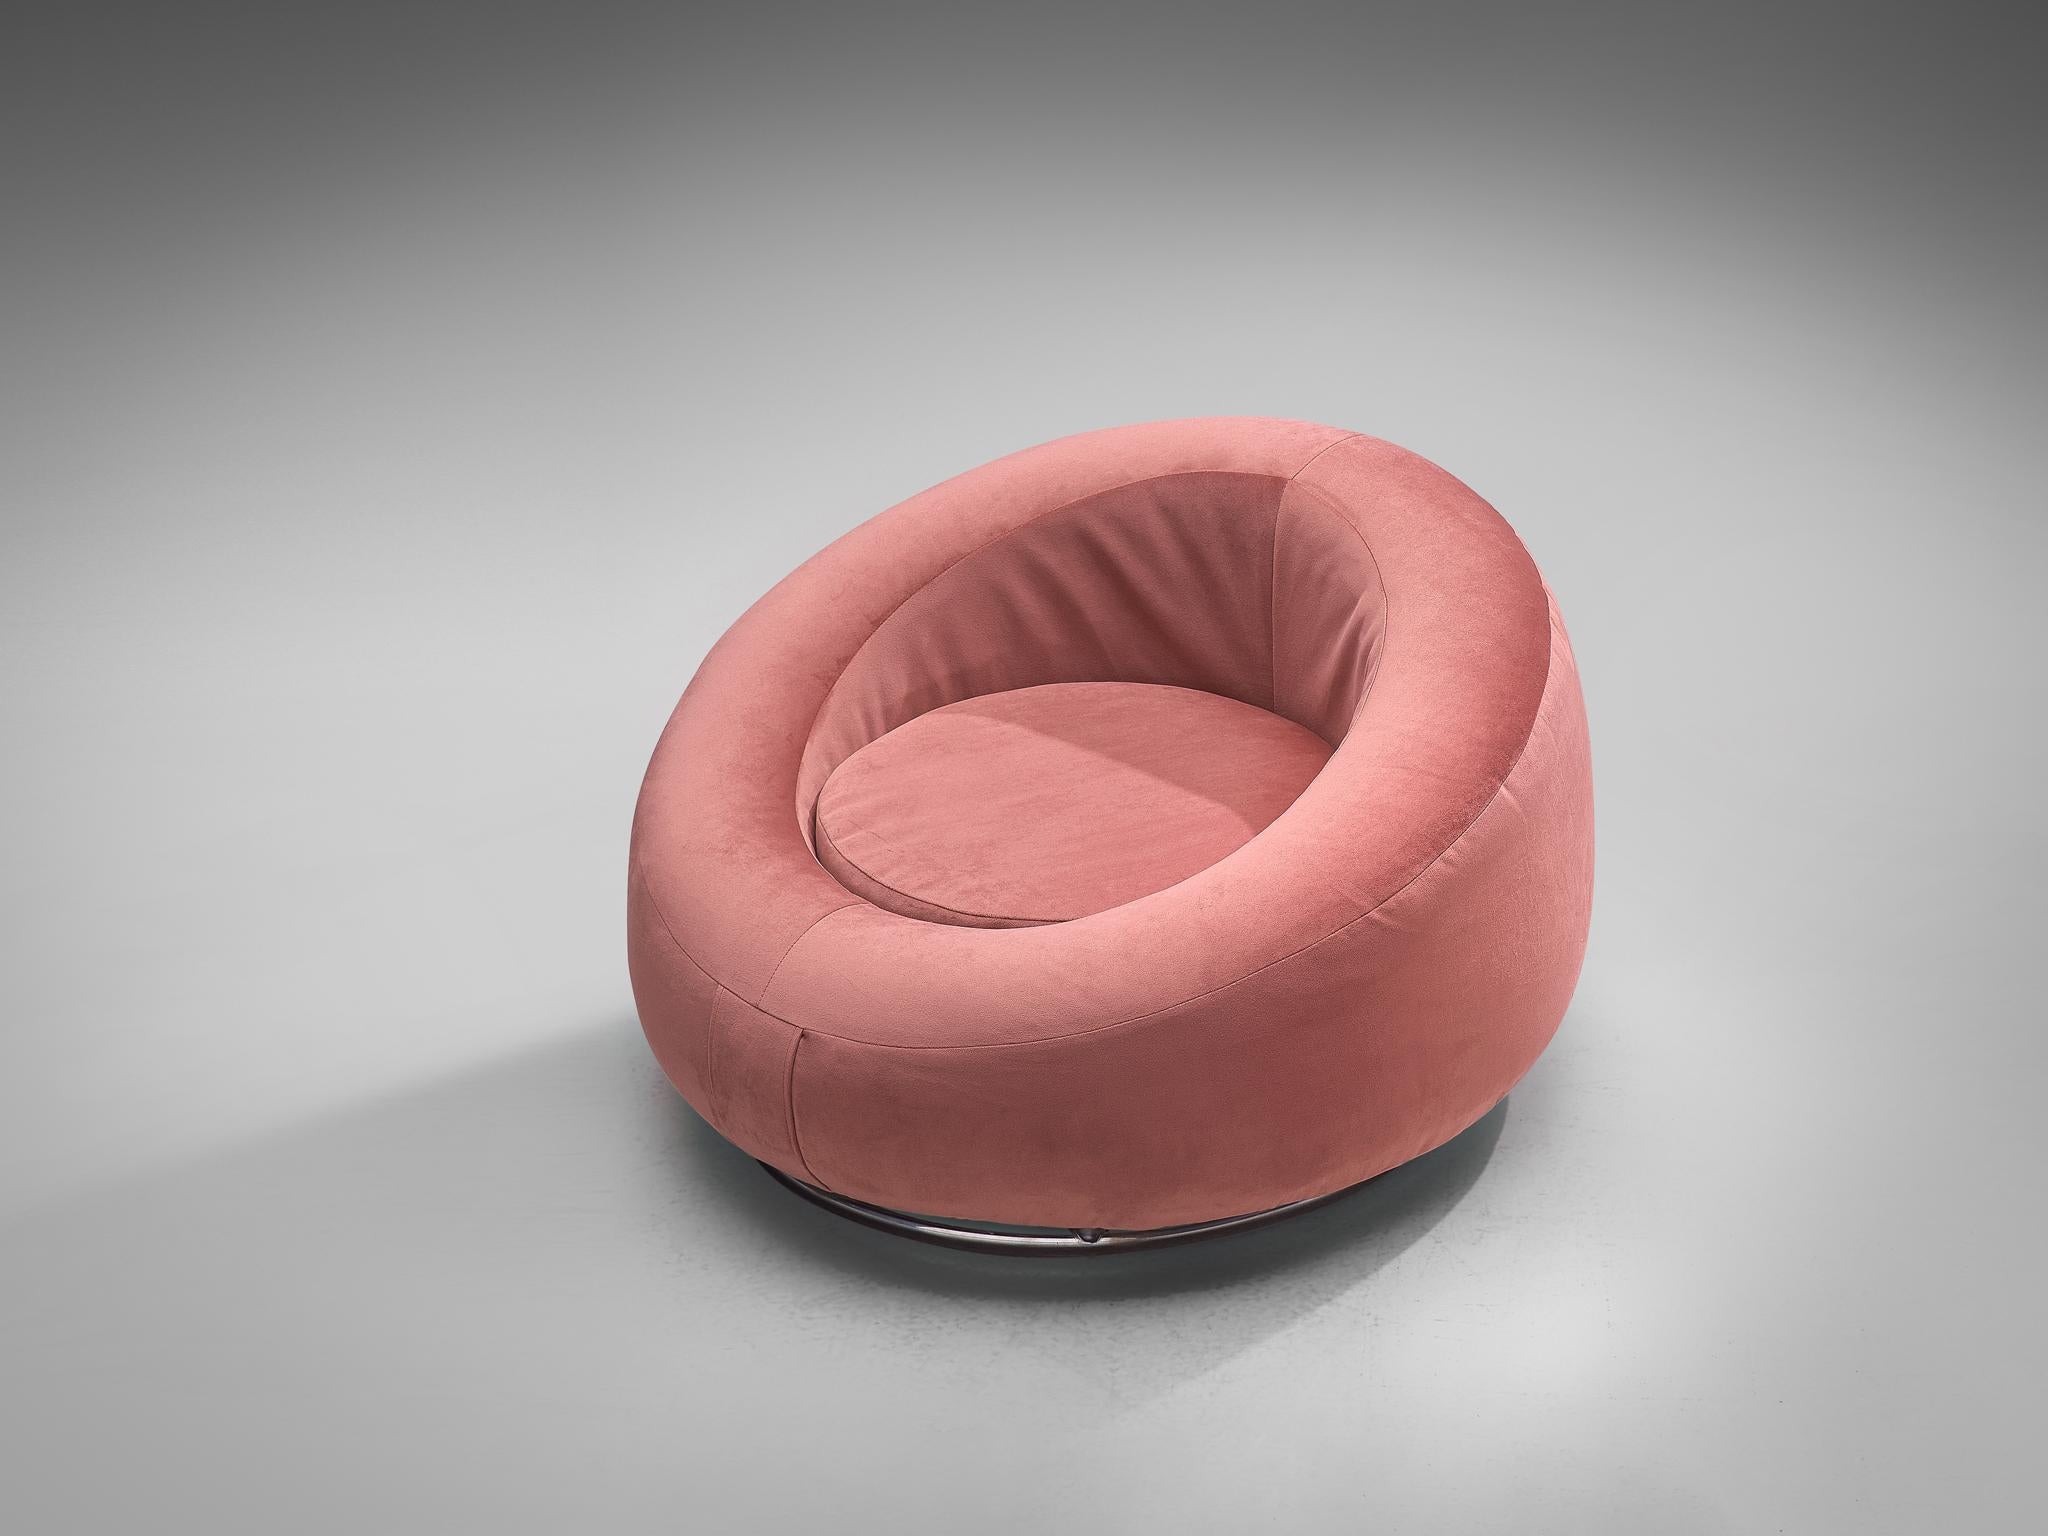 Club chair, pink velvet and chromed metal, Italy, 1970s.

This lounge chair has a gorgeous Hollywood Regency feel. The low seat features a circular shape with a thick shell around that functions as backrest and armrests. This shell is rounded as